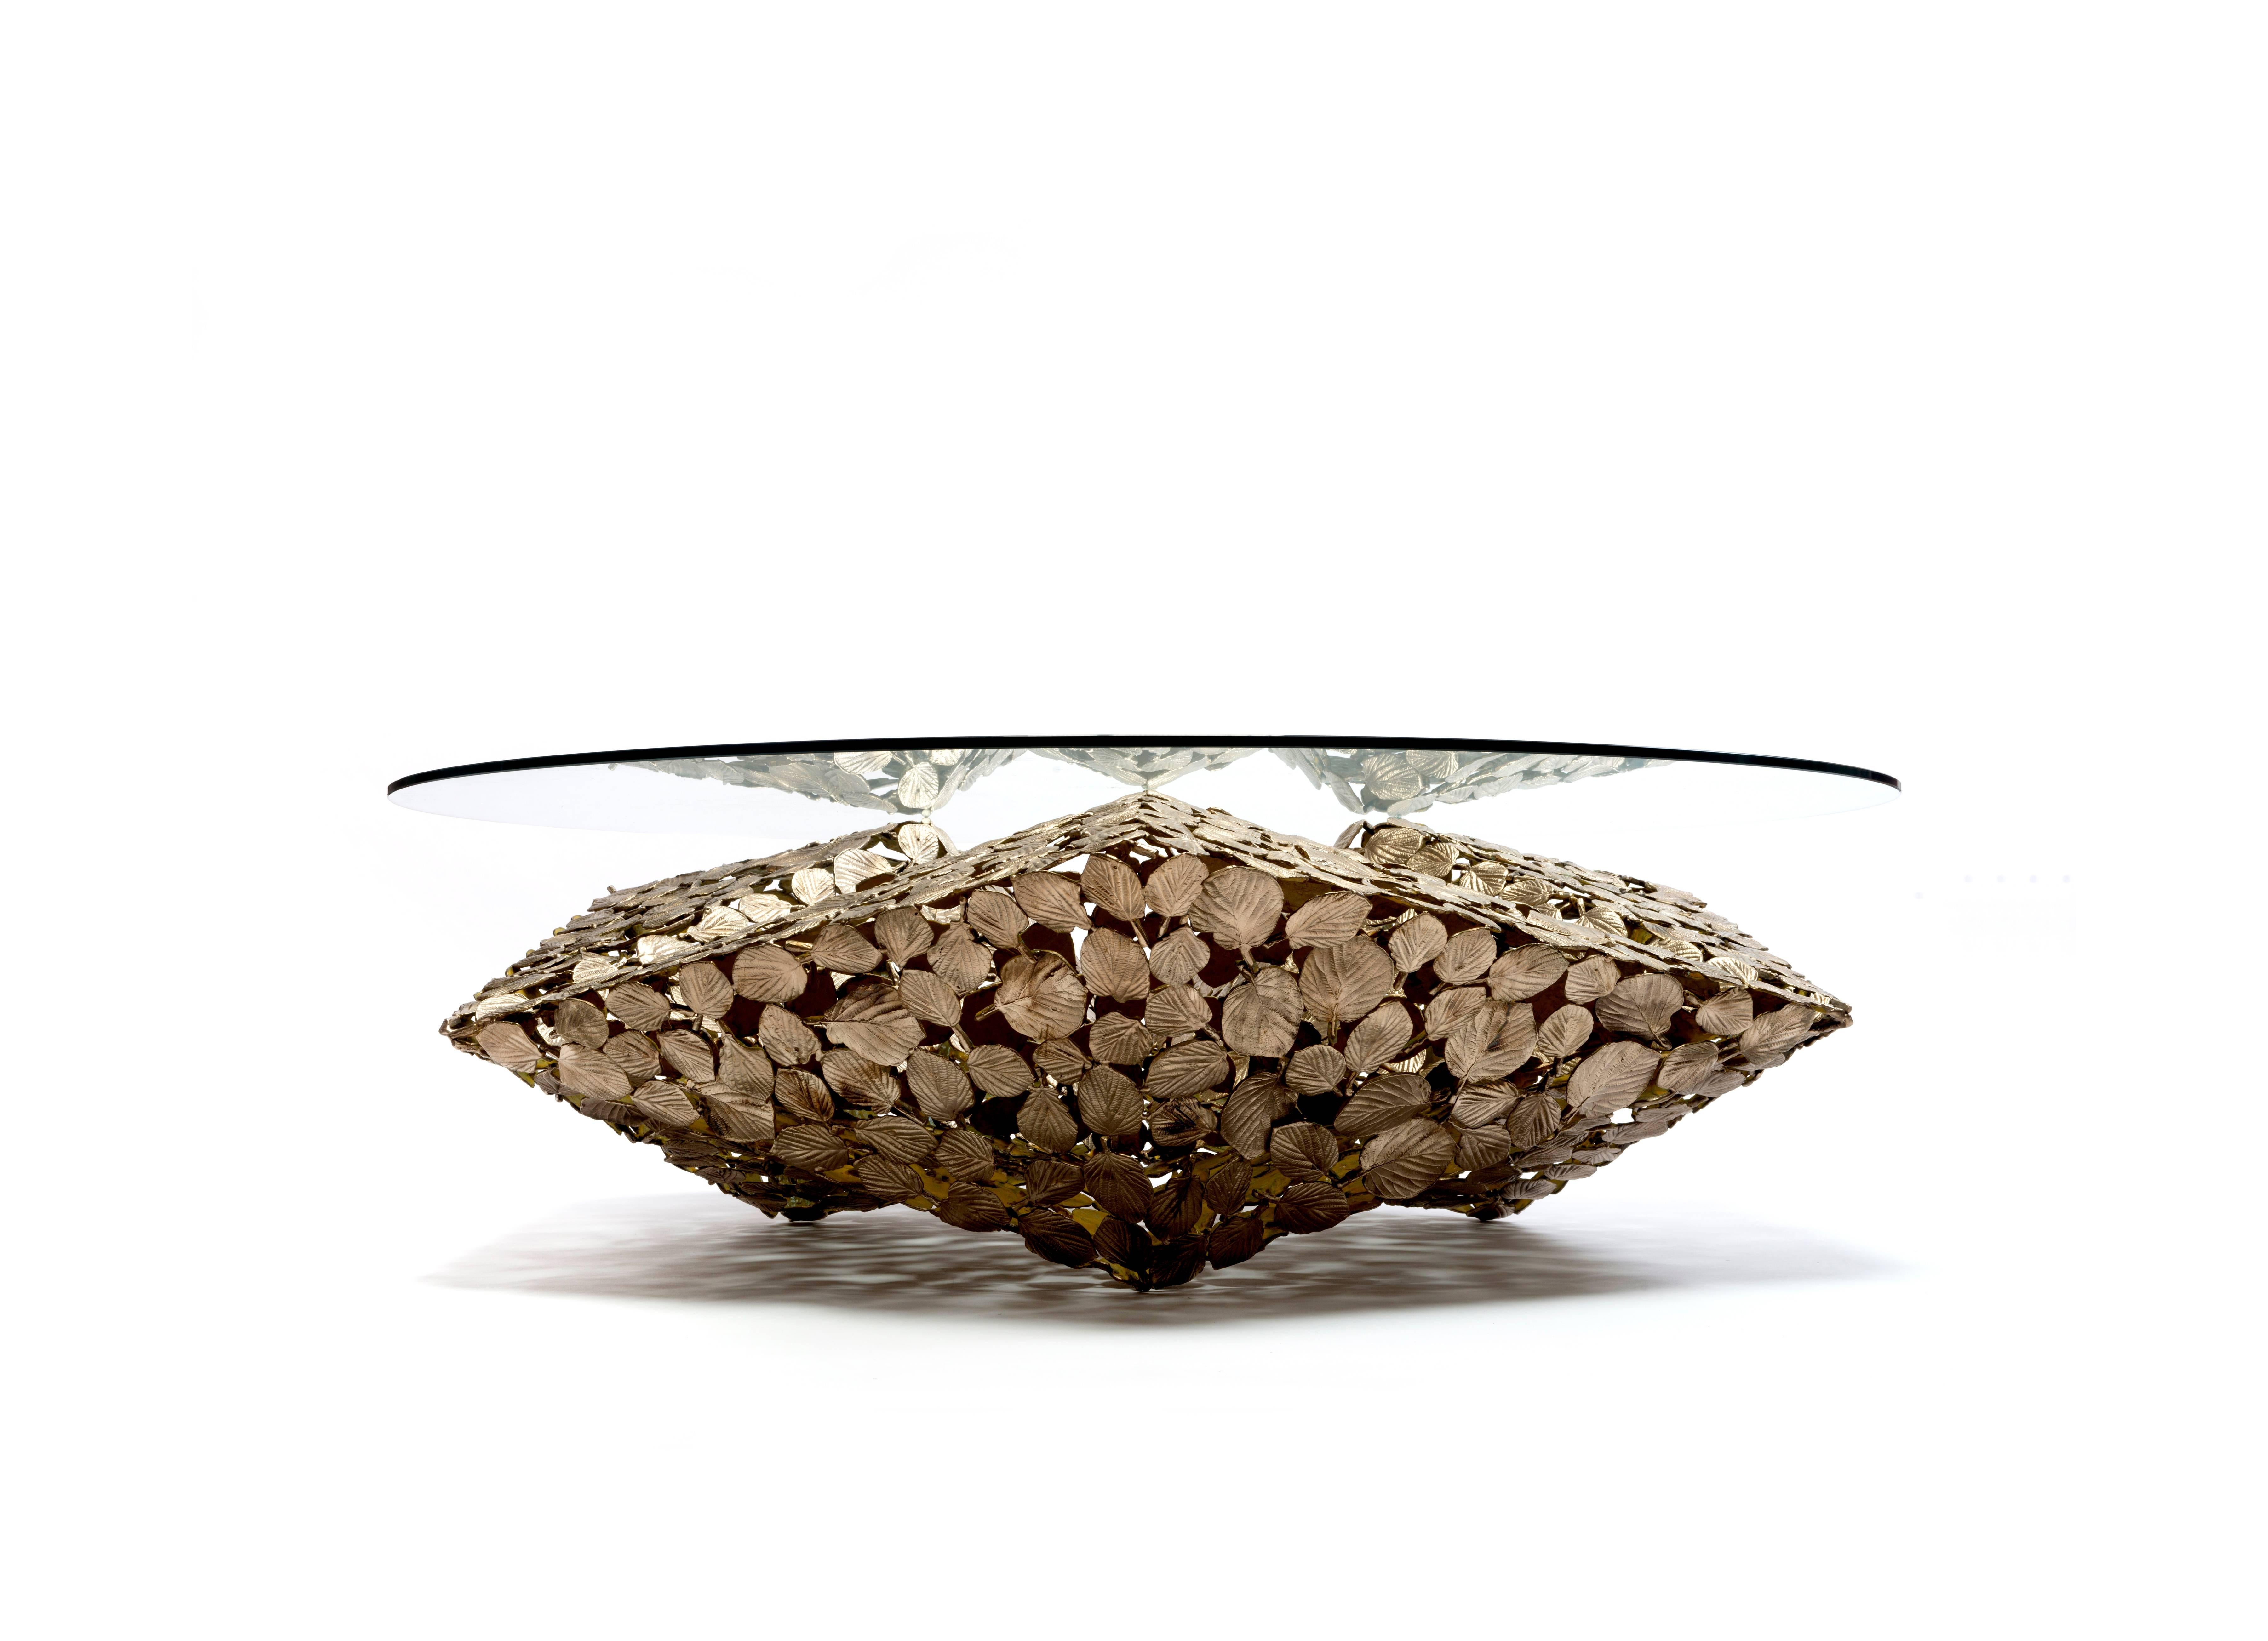 Stellated Spherical Spring table is fabricated by Gregory Nangle out of cast silicon bronze base with a glass top. The base is 53 x 53 x 16.5 inches and the glass is 56 x 56 x 0.5 inches.

The Gregory Nangle aesthetic explores what happens when